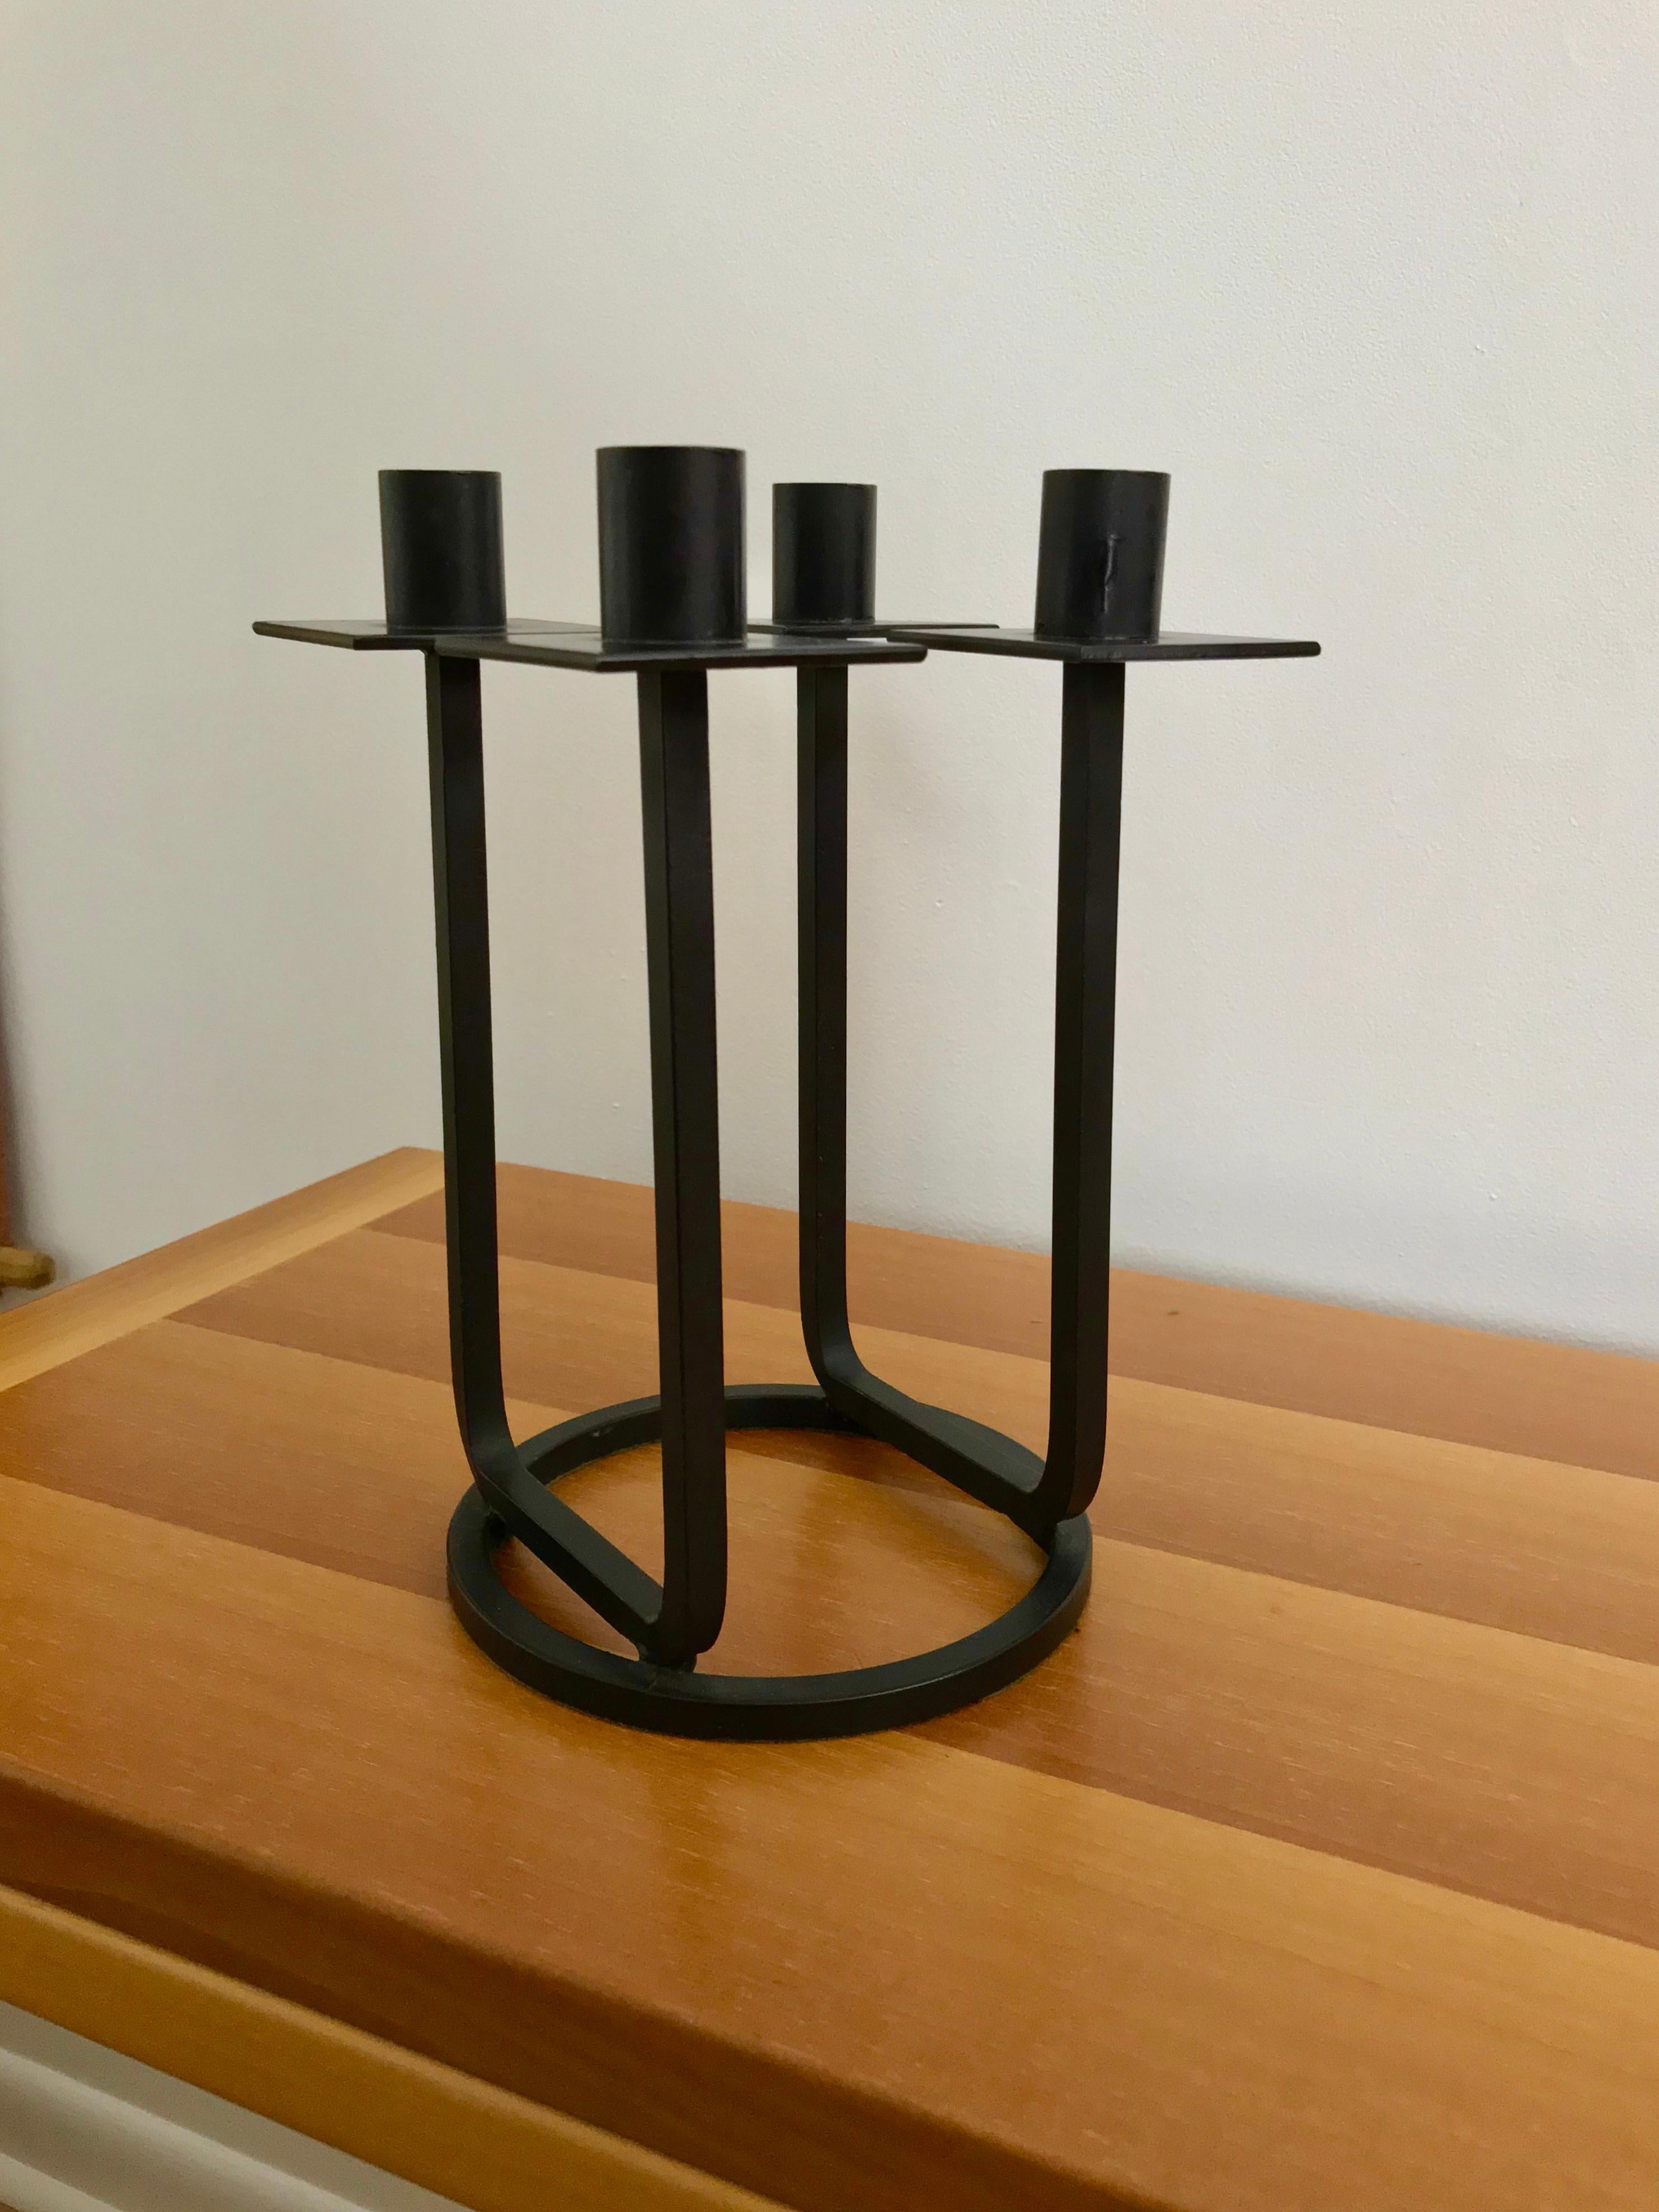 A black bent iron candlestick designed by Hendrik Van Keppel and Taylor Green of Van Keppel - Green, Beverly Hills, California. The candlestick is black painted iron, designed / manufactured in the 1950’s and measures approximately 9 3/4 inches high